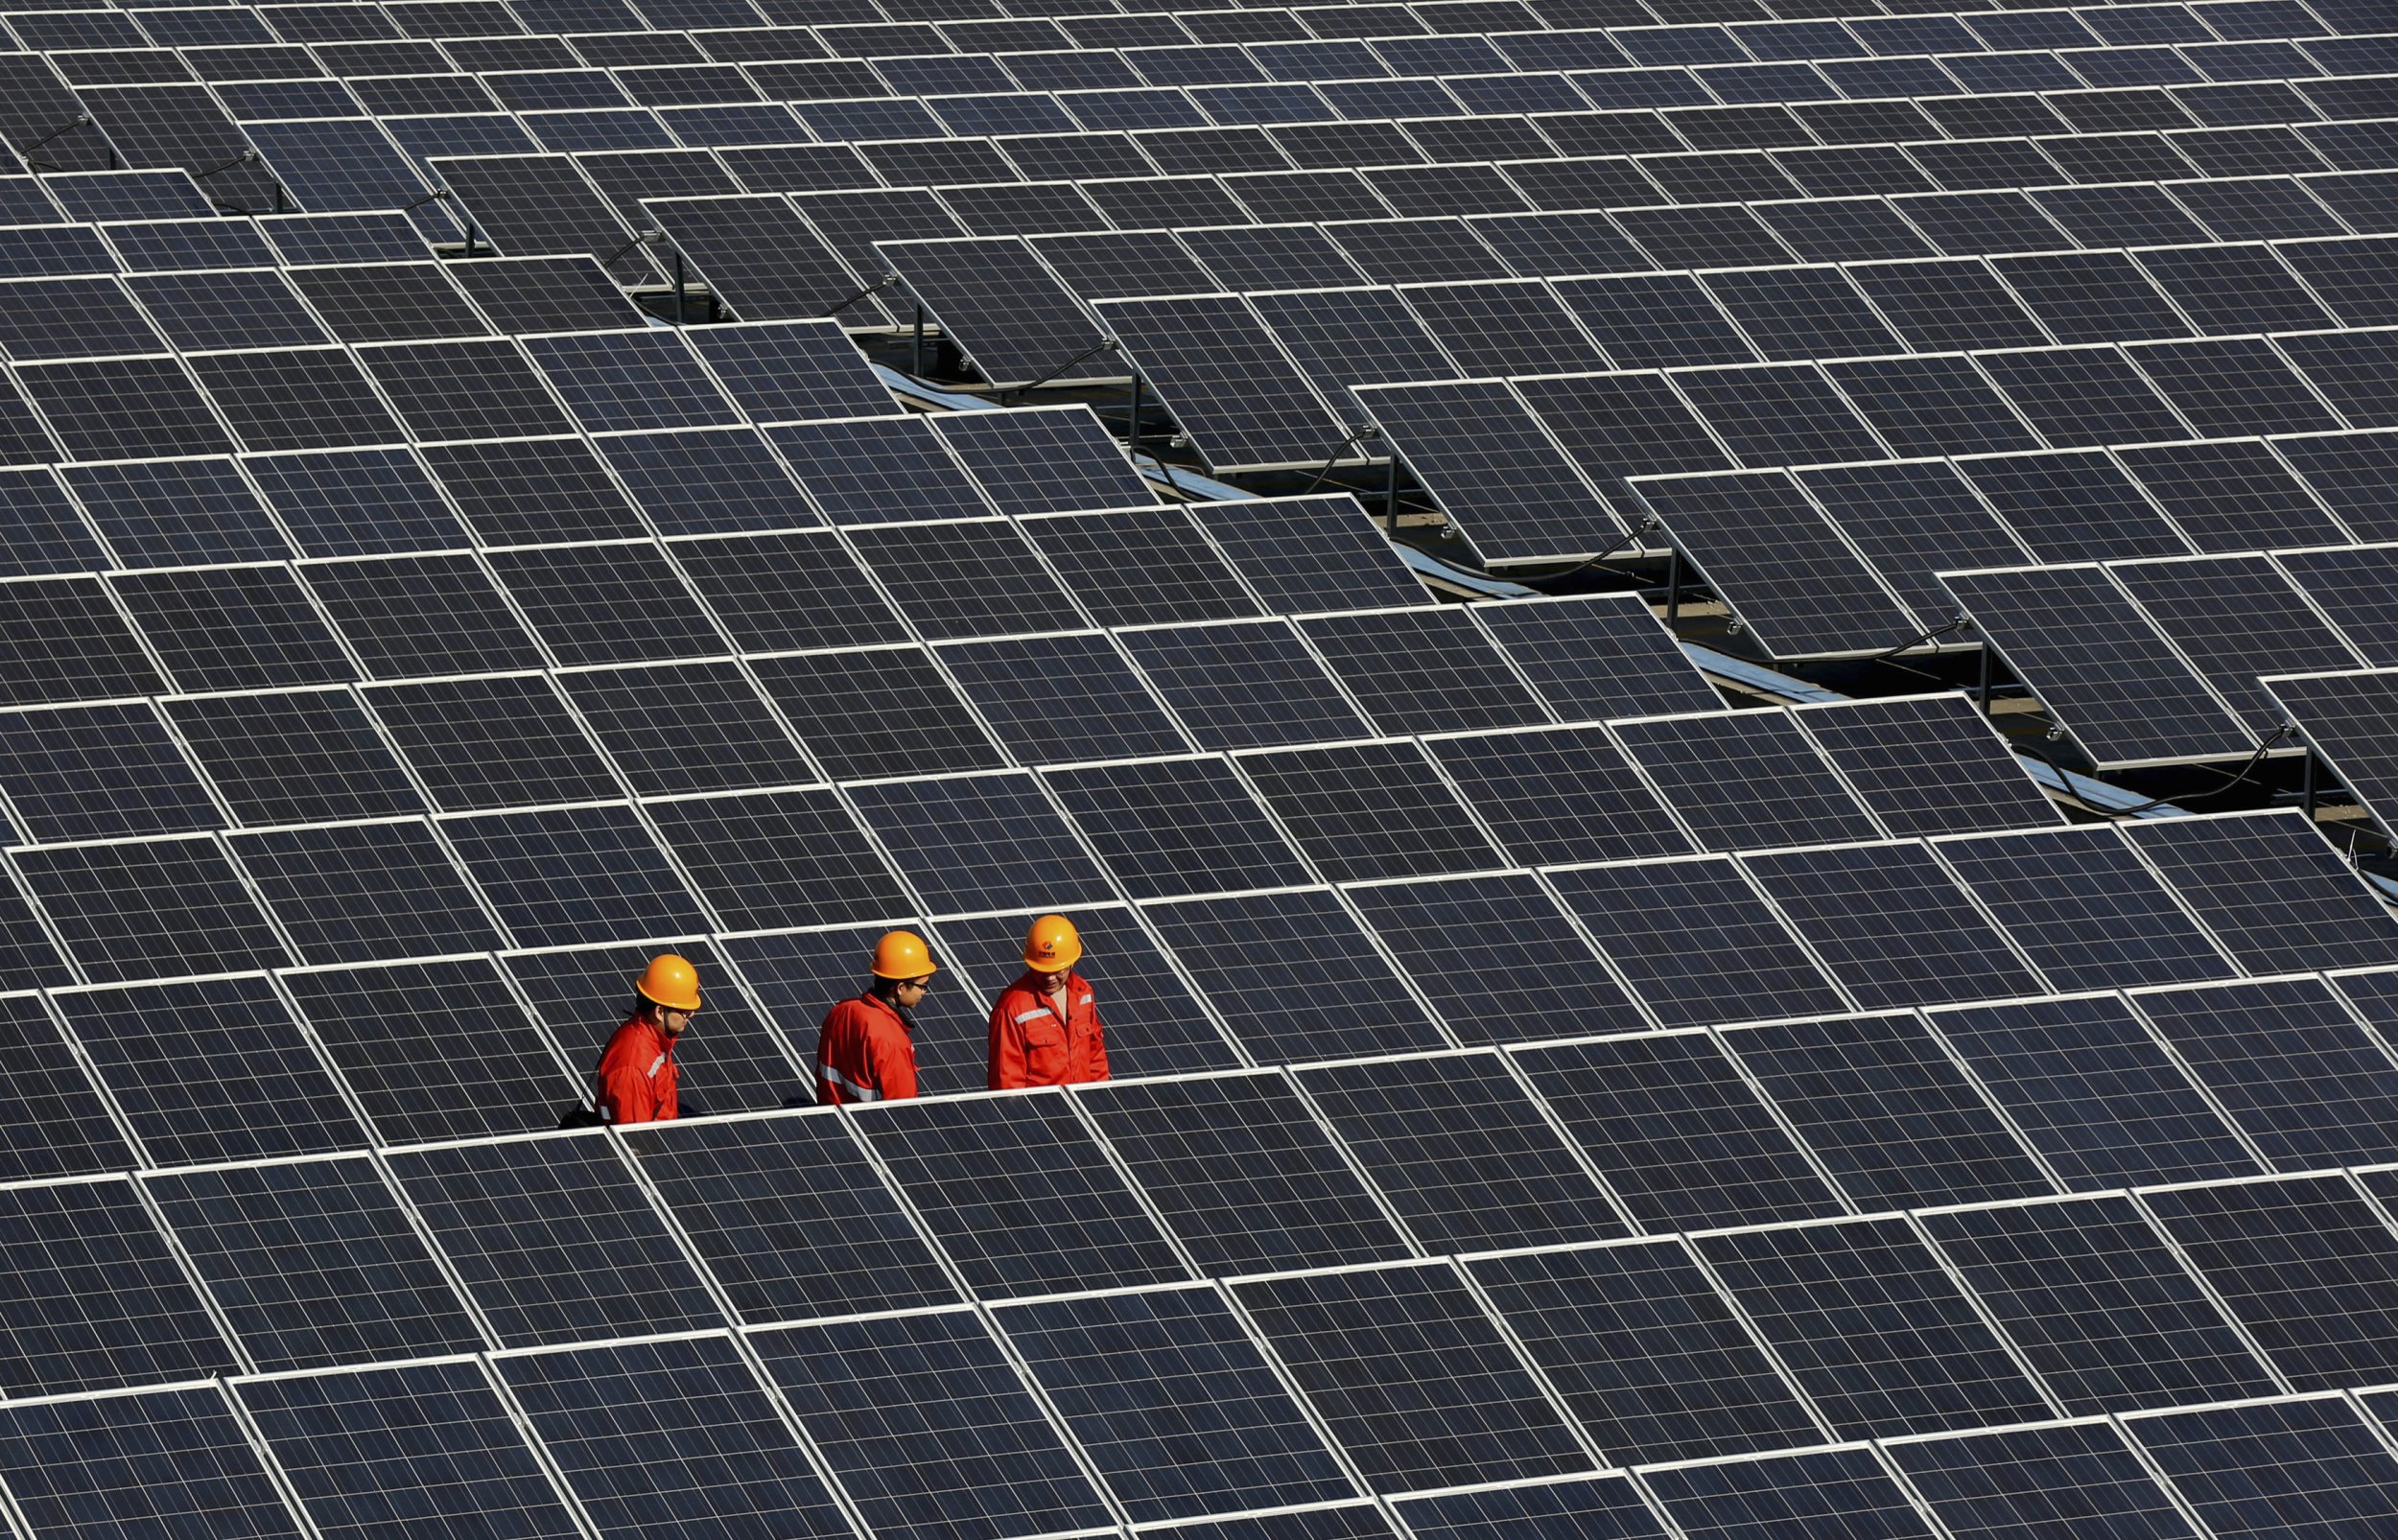 Solar panels at a solar power plant in Zhejiang province, China. 